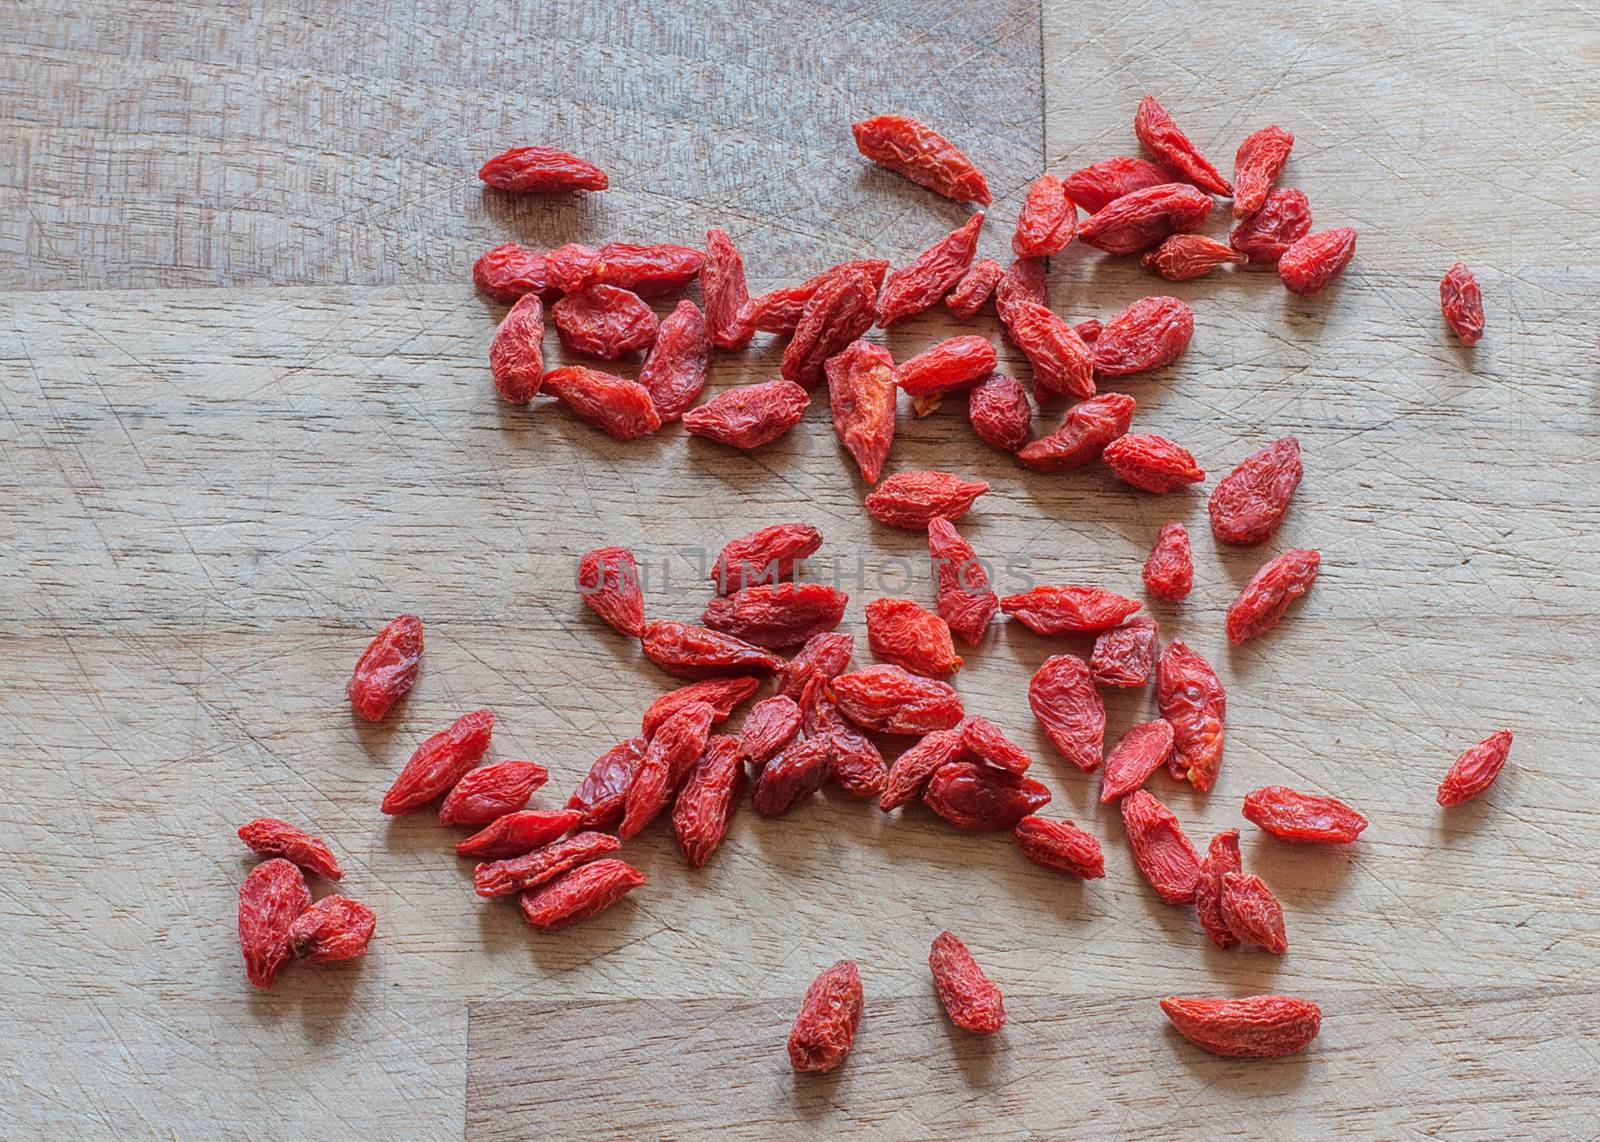 red goji berries on a wodden surface by sirspread